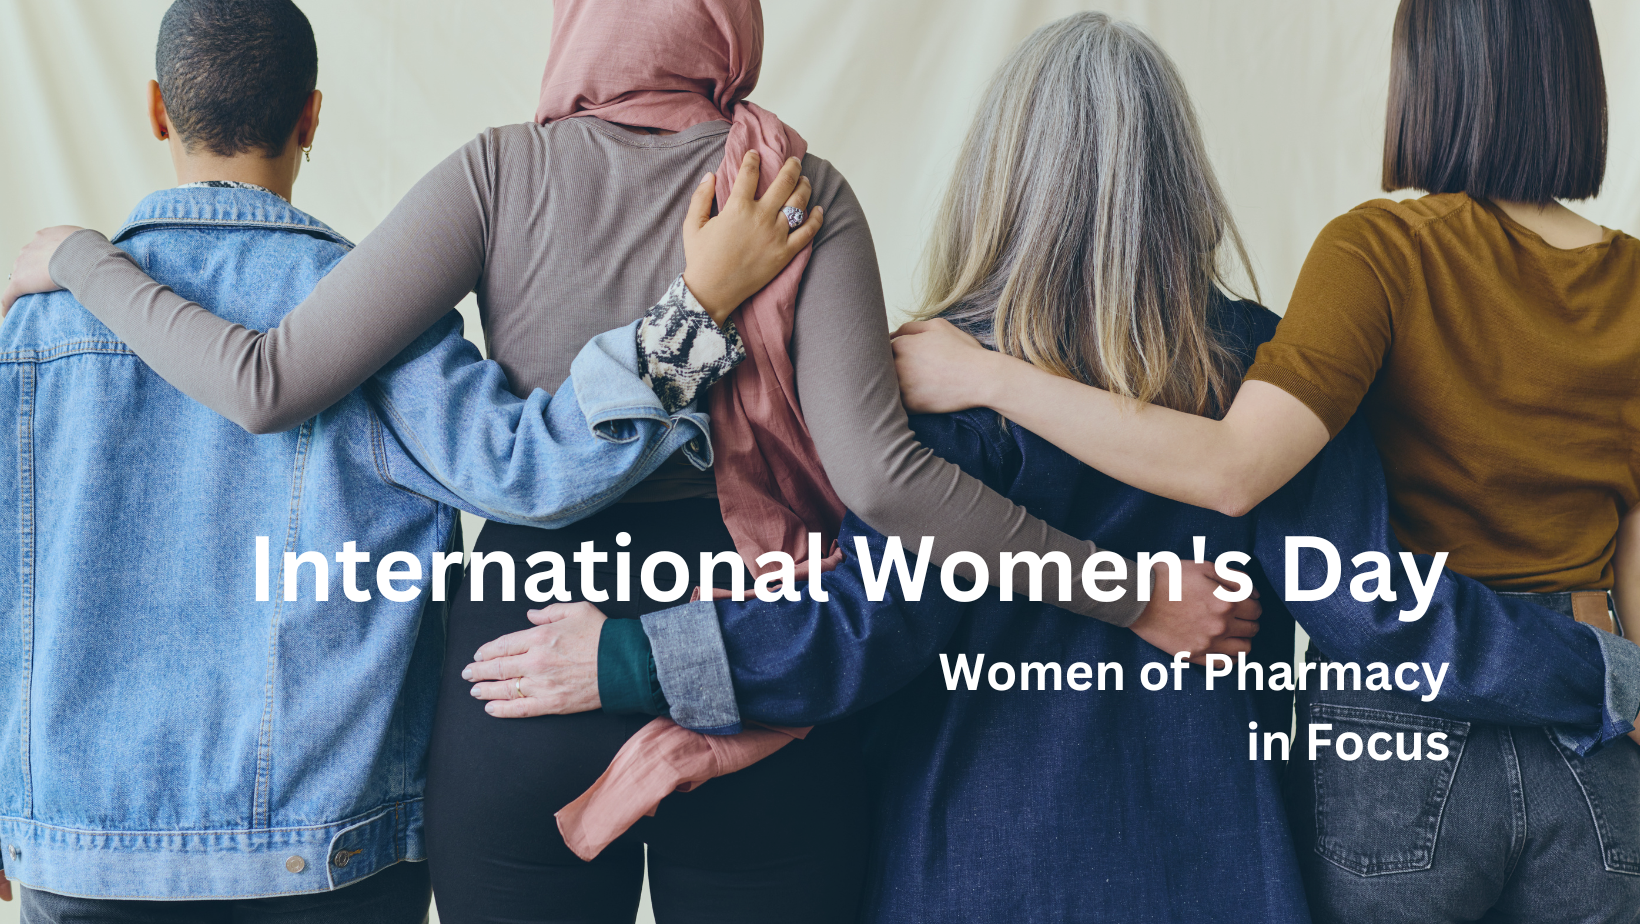 Four women embracing, turned away from the camera, overlaid with text 'International Women's Day. Women of Pharmacy in Focus'.